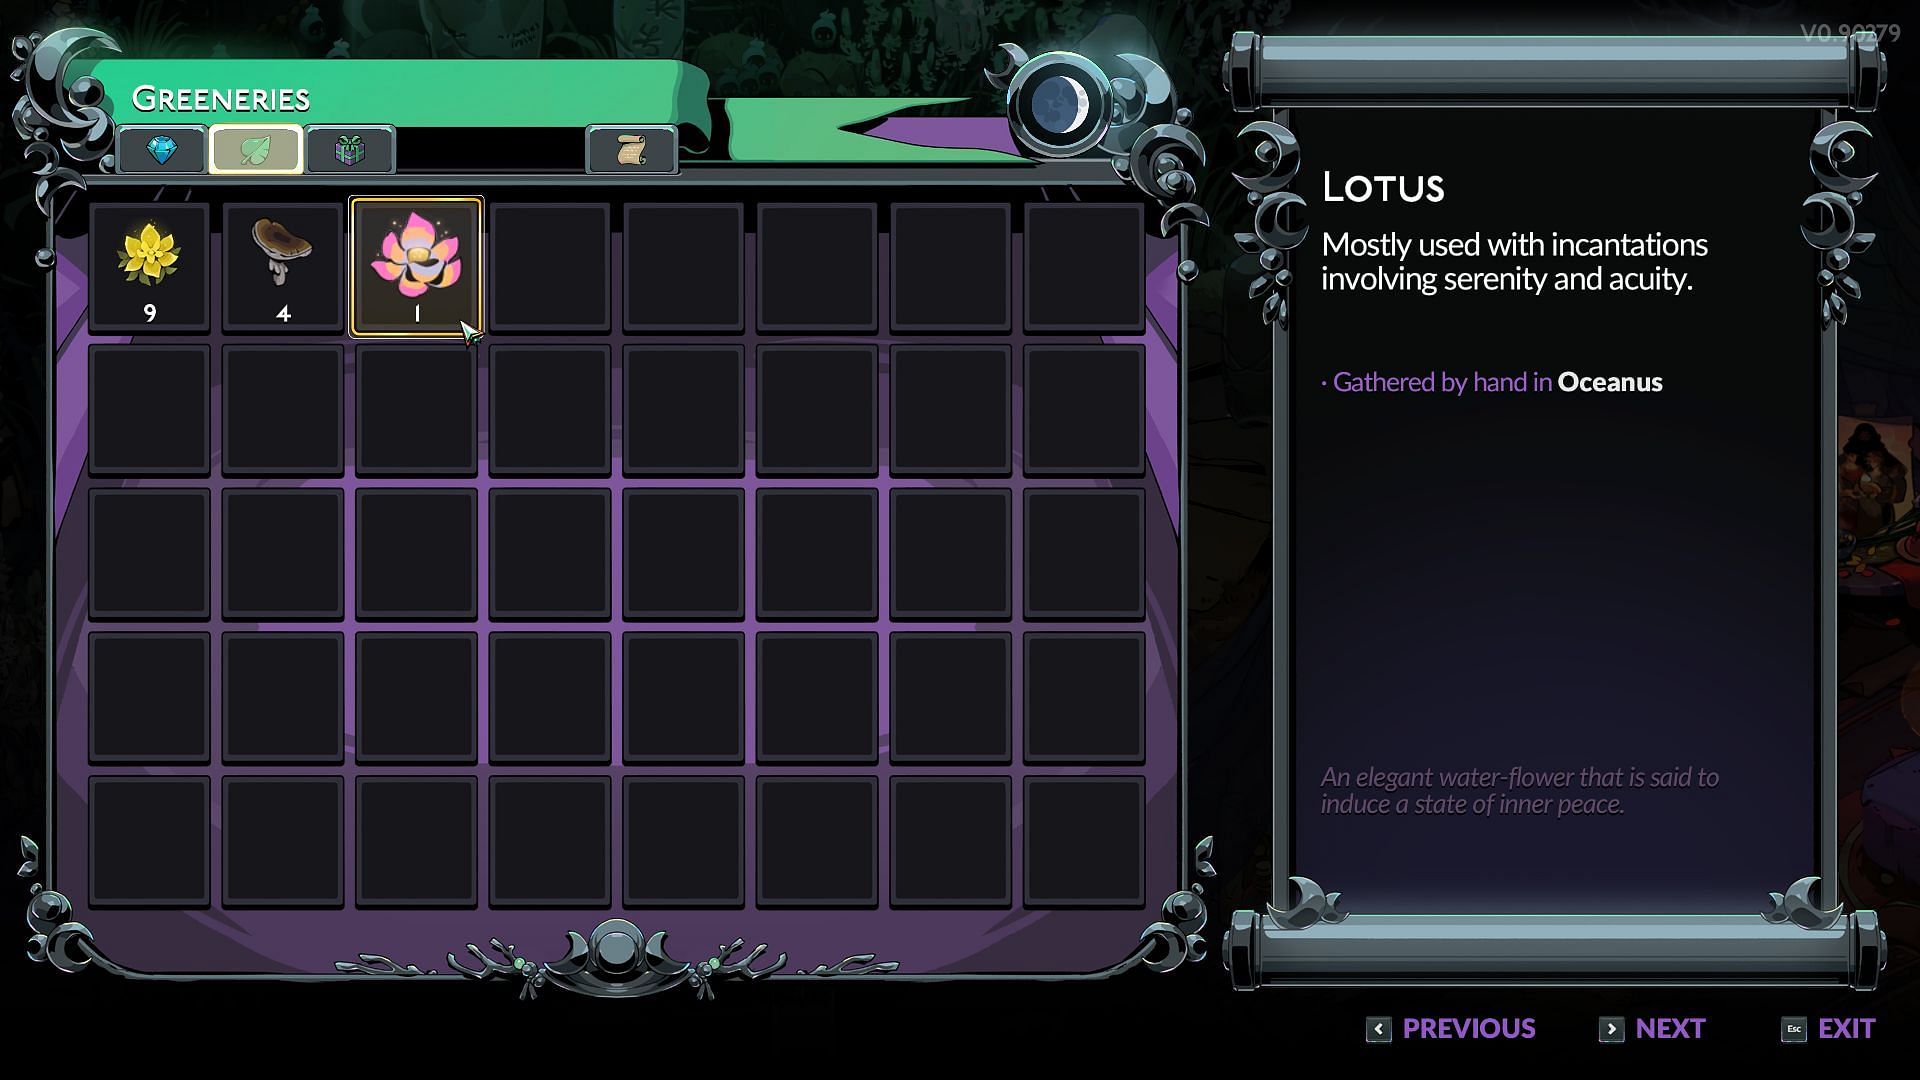 Lotus can be used for incantations (Image via Supergiant Games)